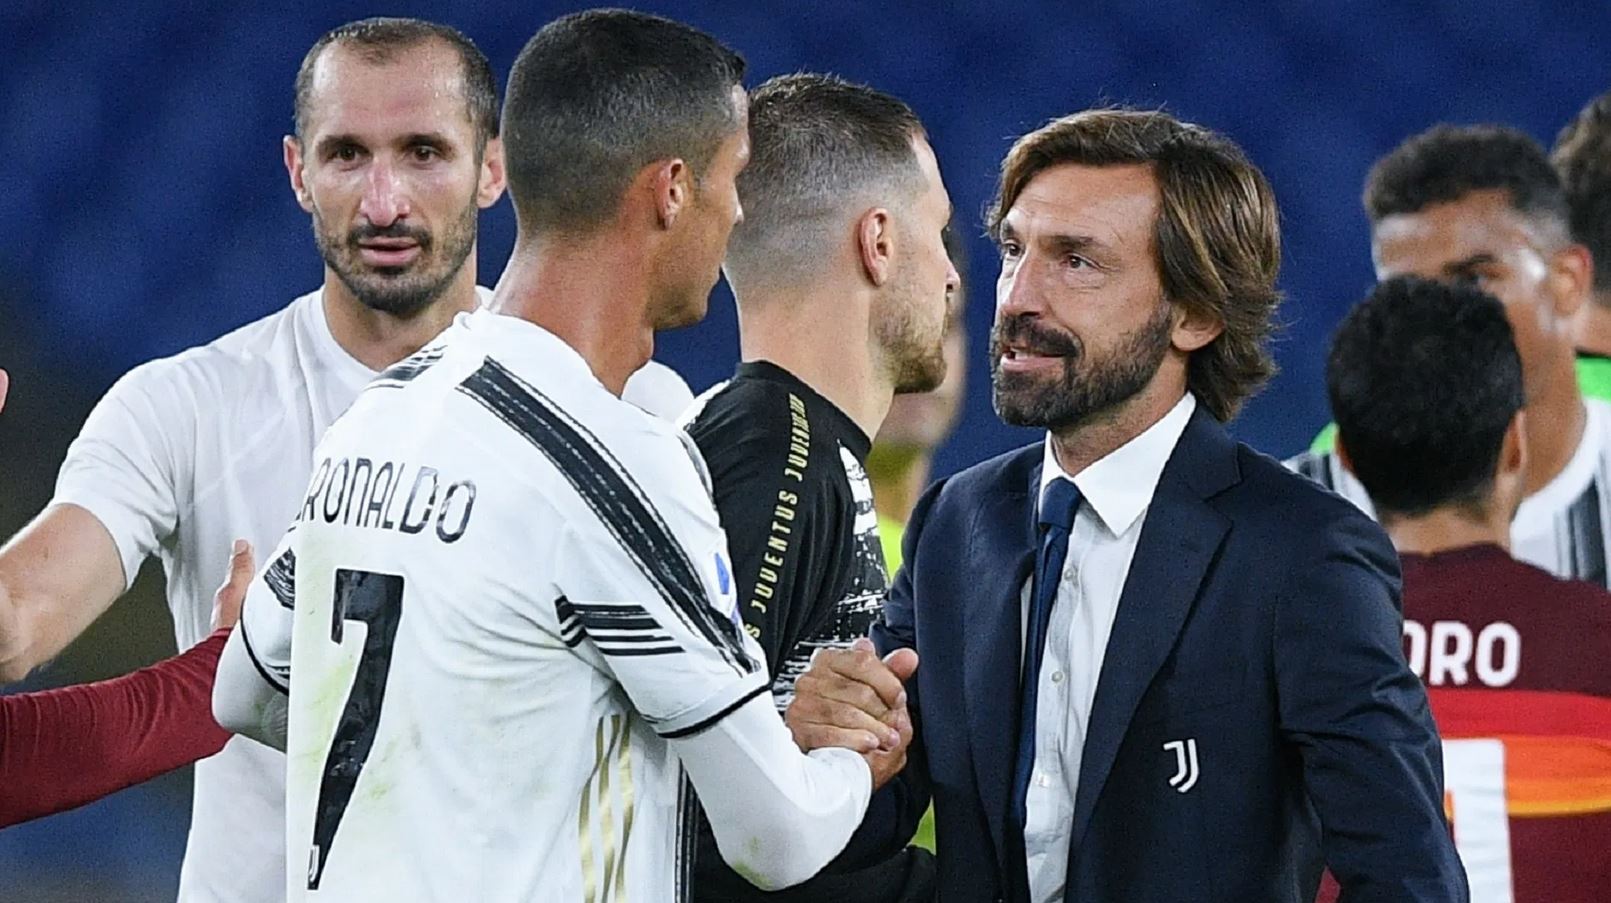 Cristiano Ronaldo was the subject of multiple transfer rumors regarding his alleged intention to leave Juventus, but his intentions seem to be clear now